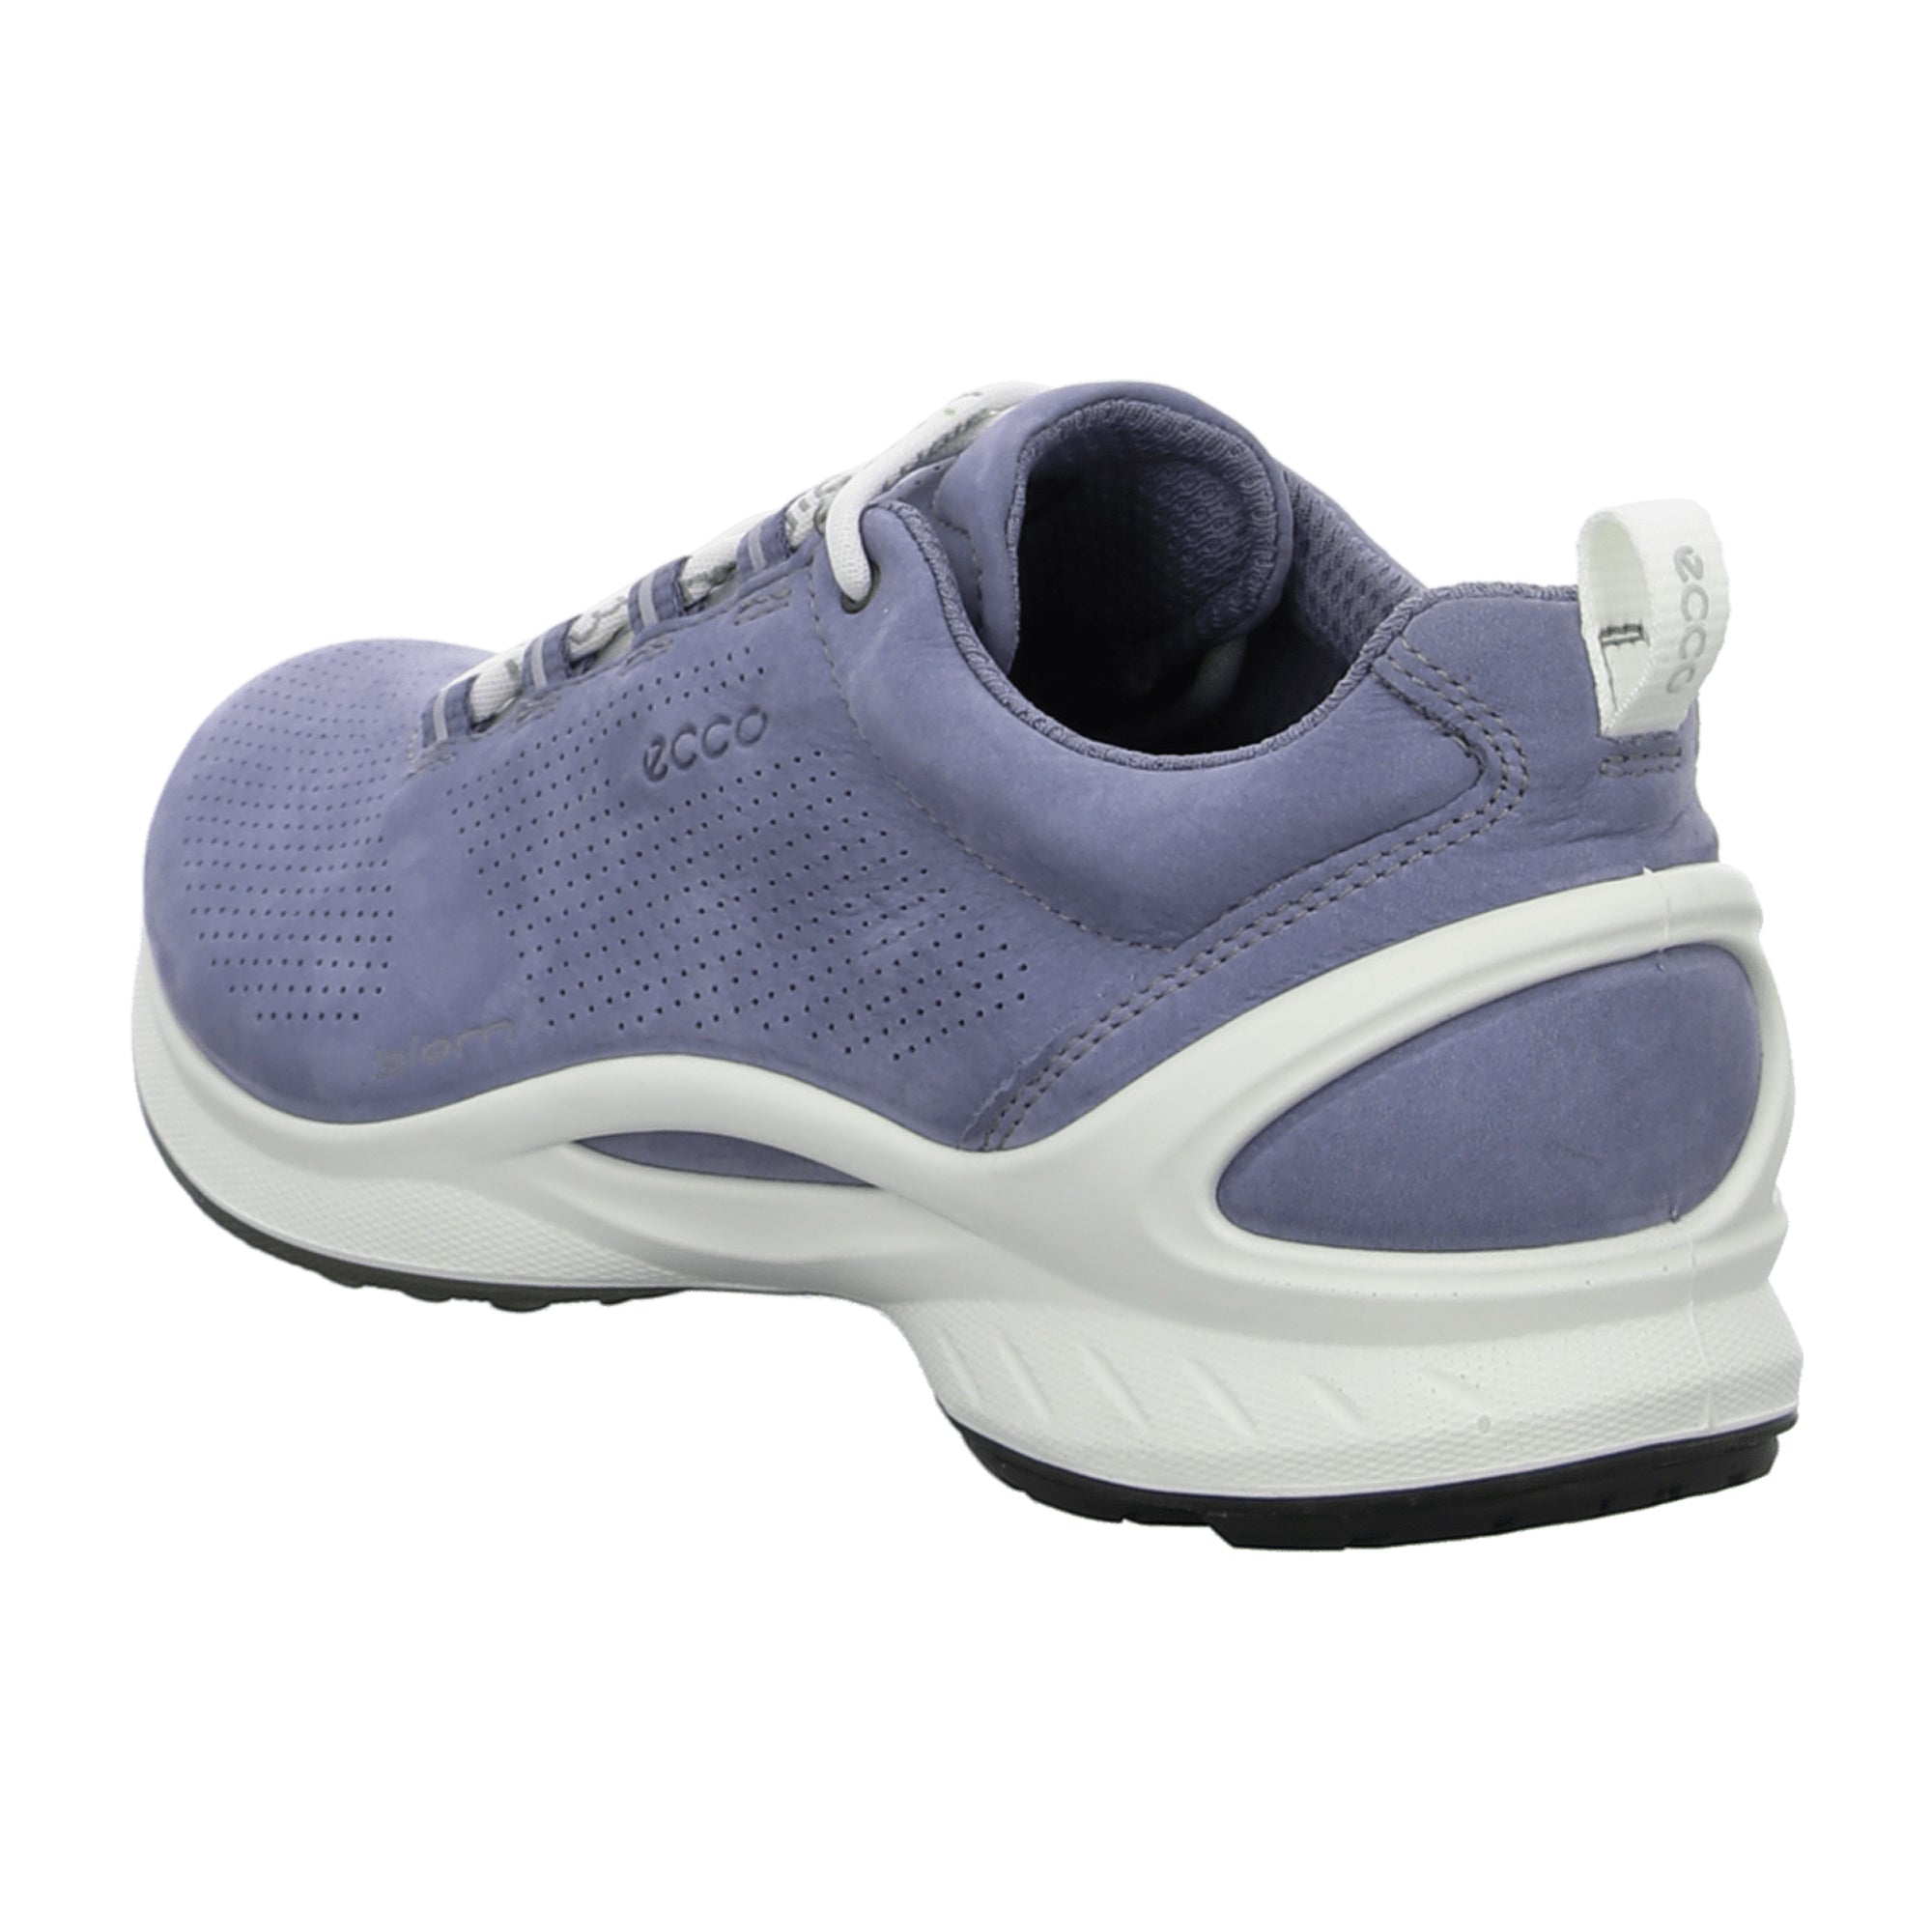 Ecco Biom Fjuel Women's Blue - Comfortable Athletic Shoes for Active Lifestyle